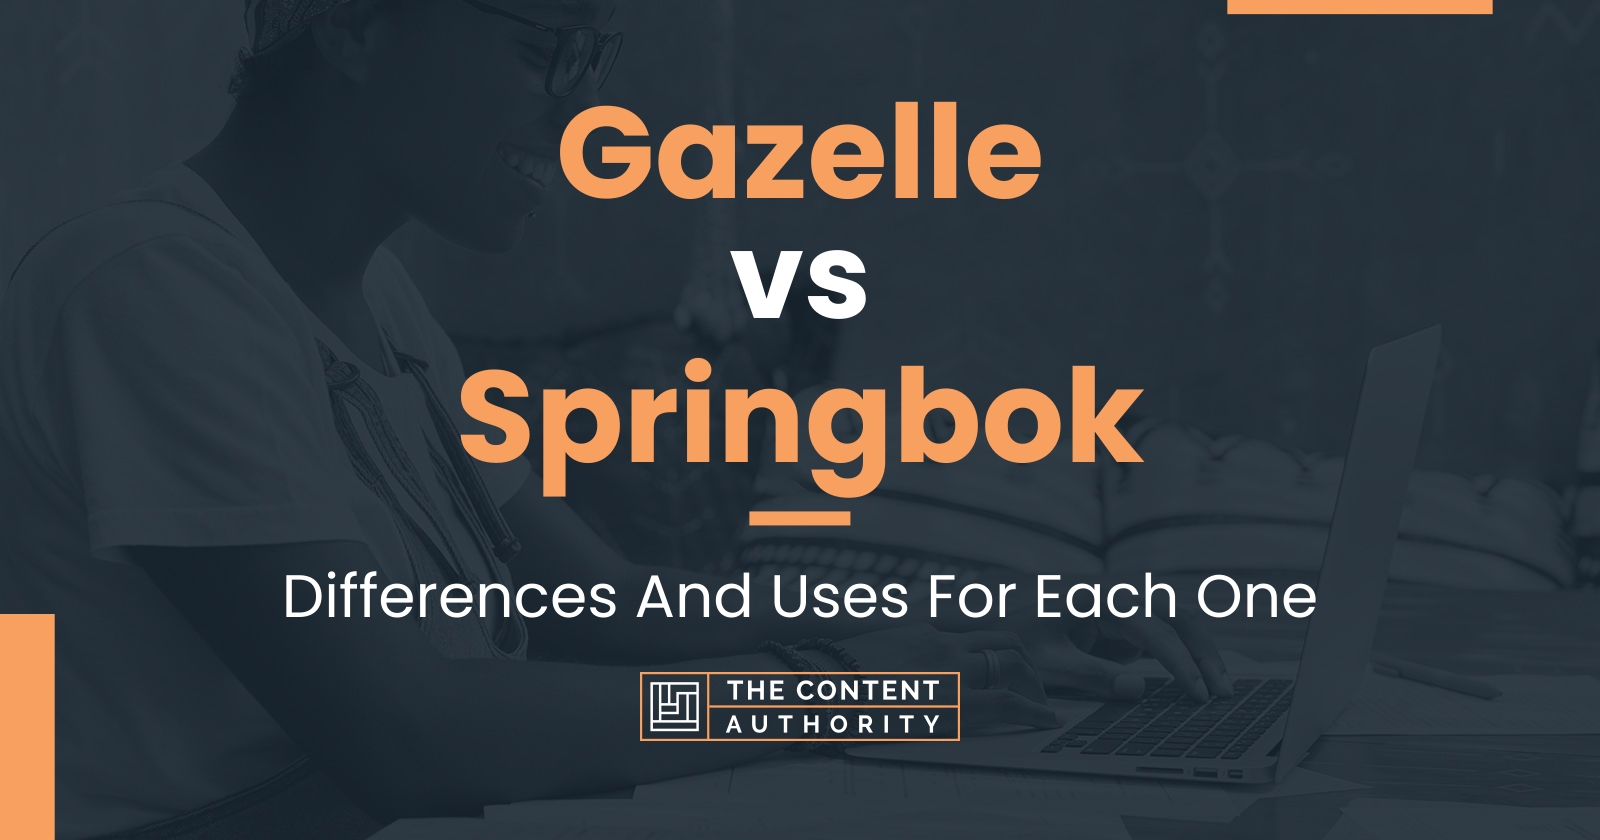 Gazelle vs Springbok: Differences And Uses For Each One